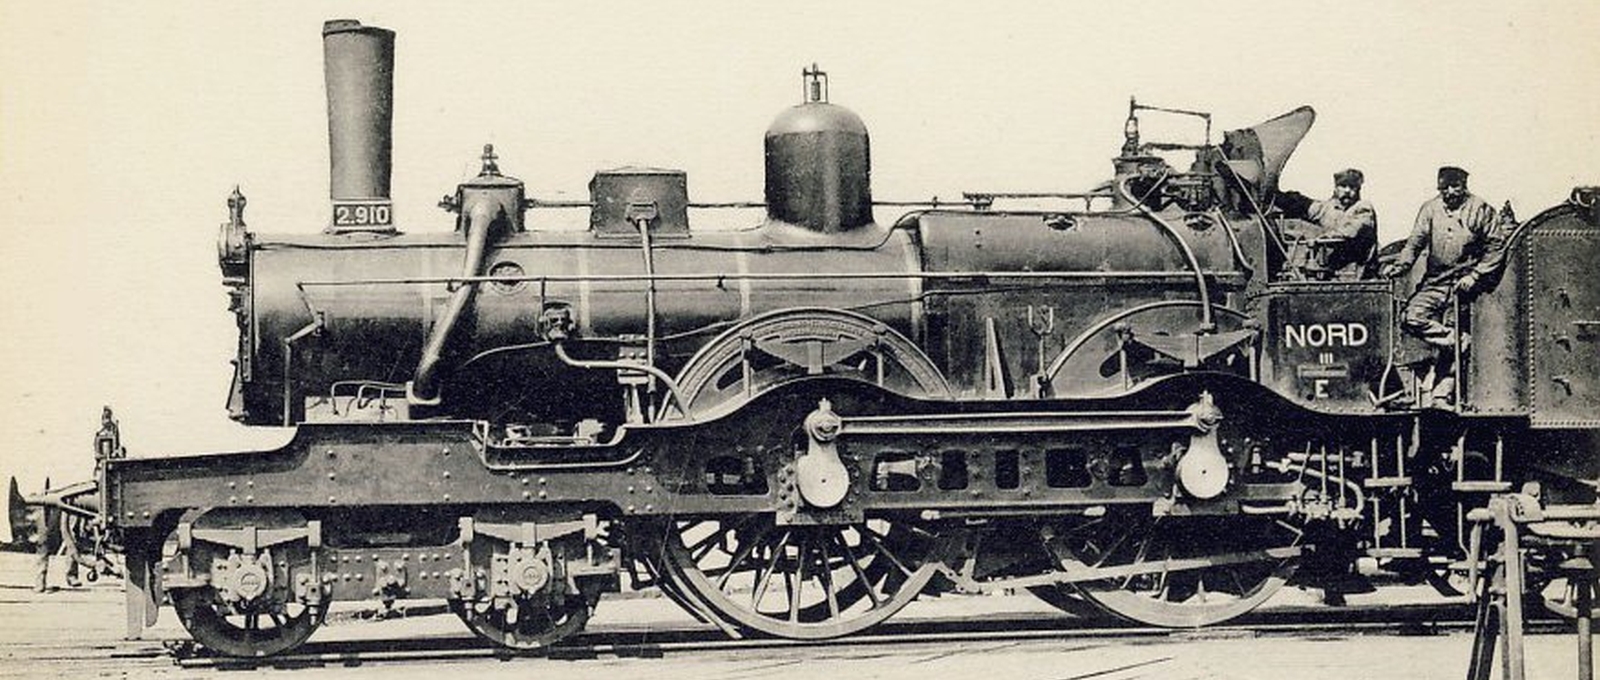 No. 2.910 that was already built as 4-4-0